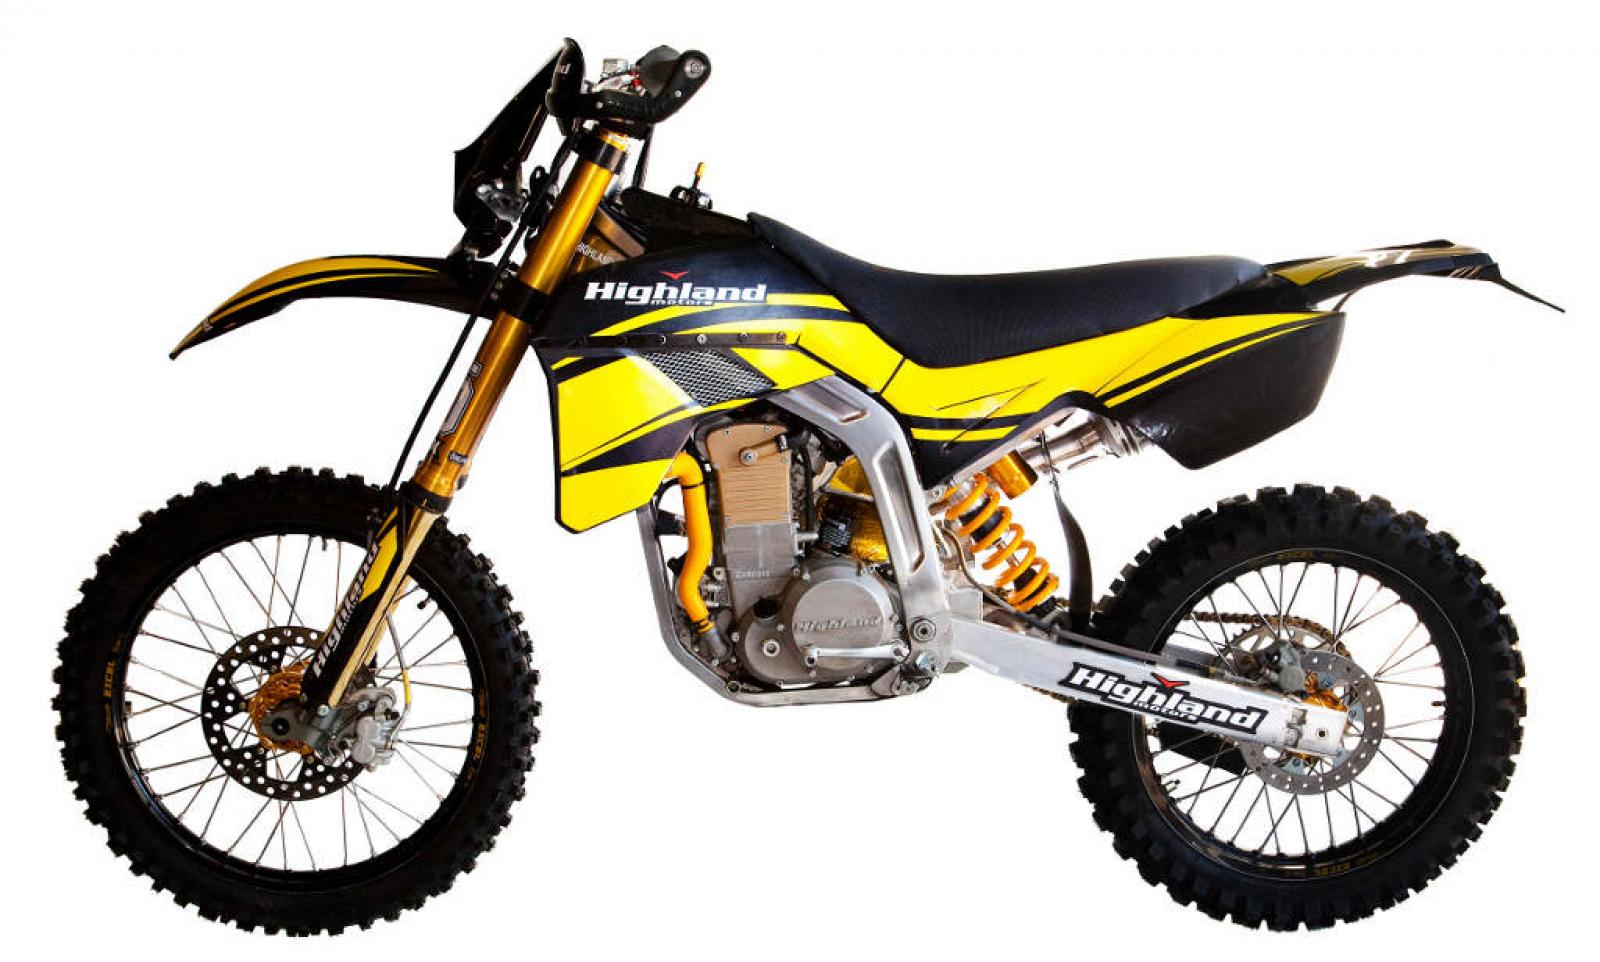 Highland 750 V2 Desert X For Sale Specifications, Price and Images